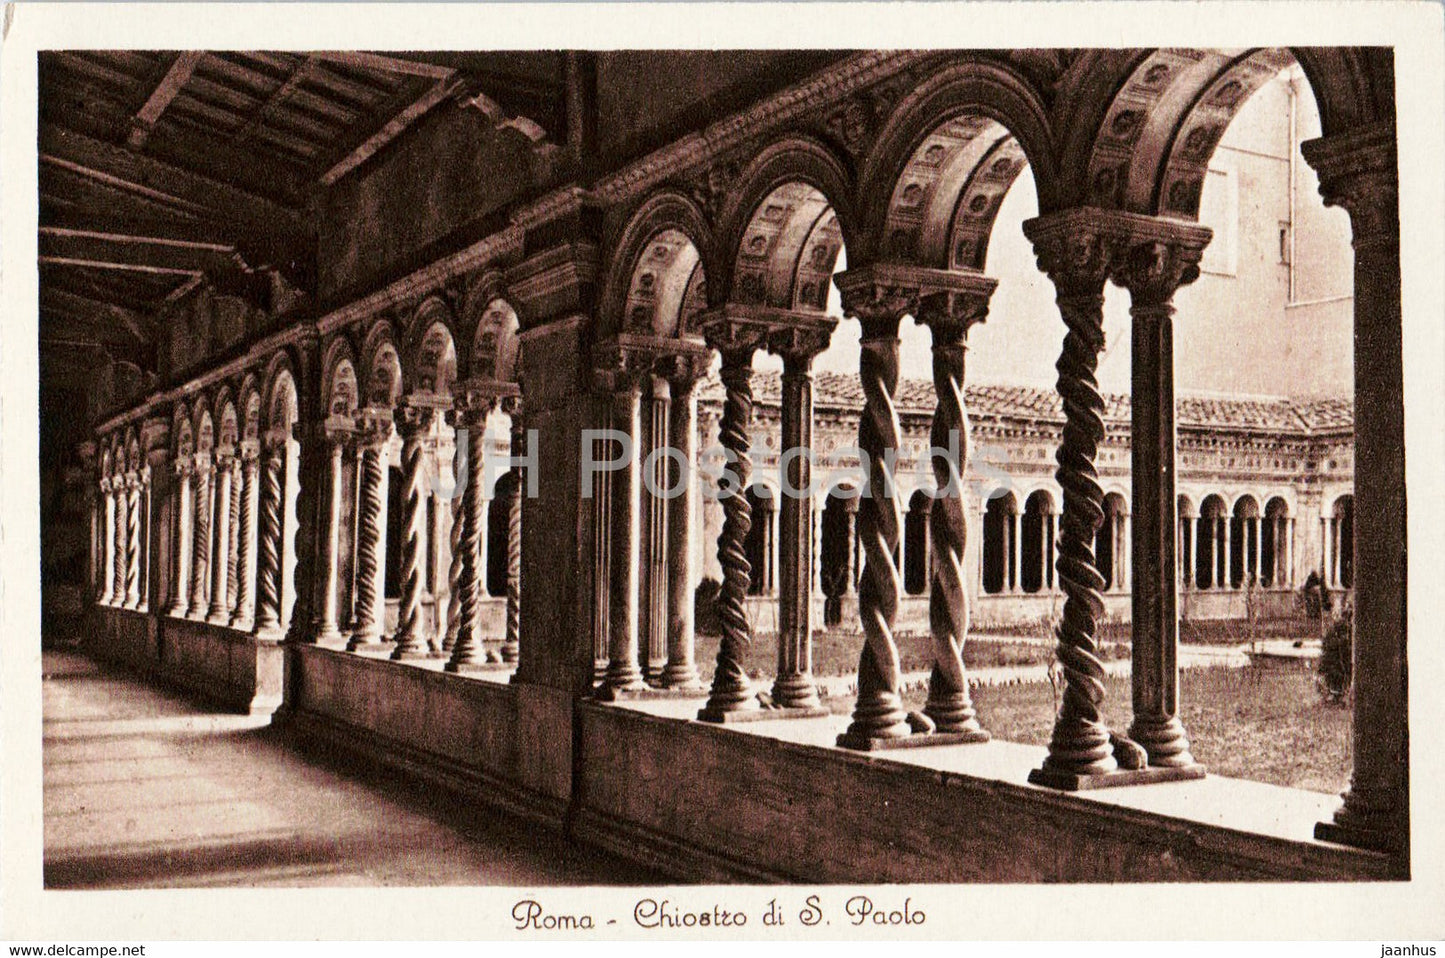 Roma - Rome - Chiostro di S Paolo - cloister - 686 - old postcard - Italy - unused - JH Postcards